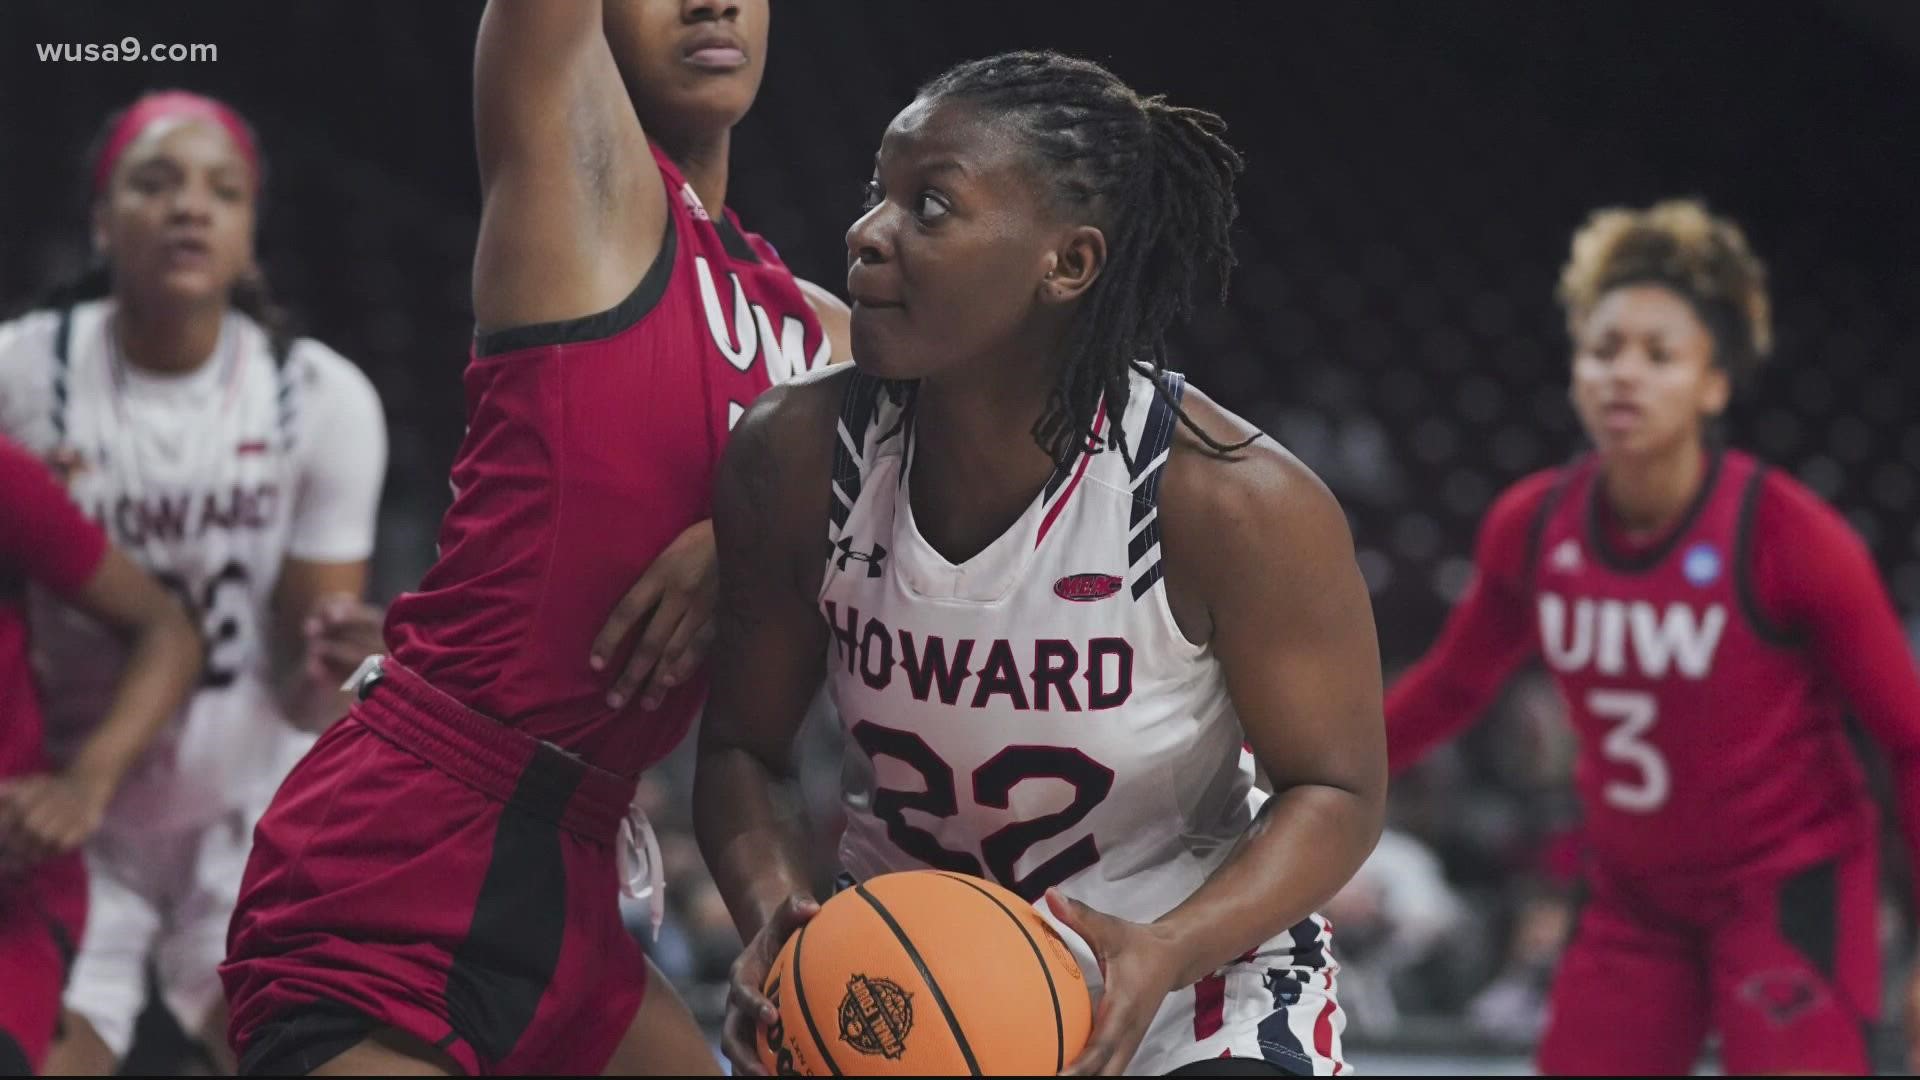 Howard's women's basketball team is ready to continue its historic run in March.